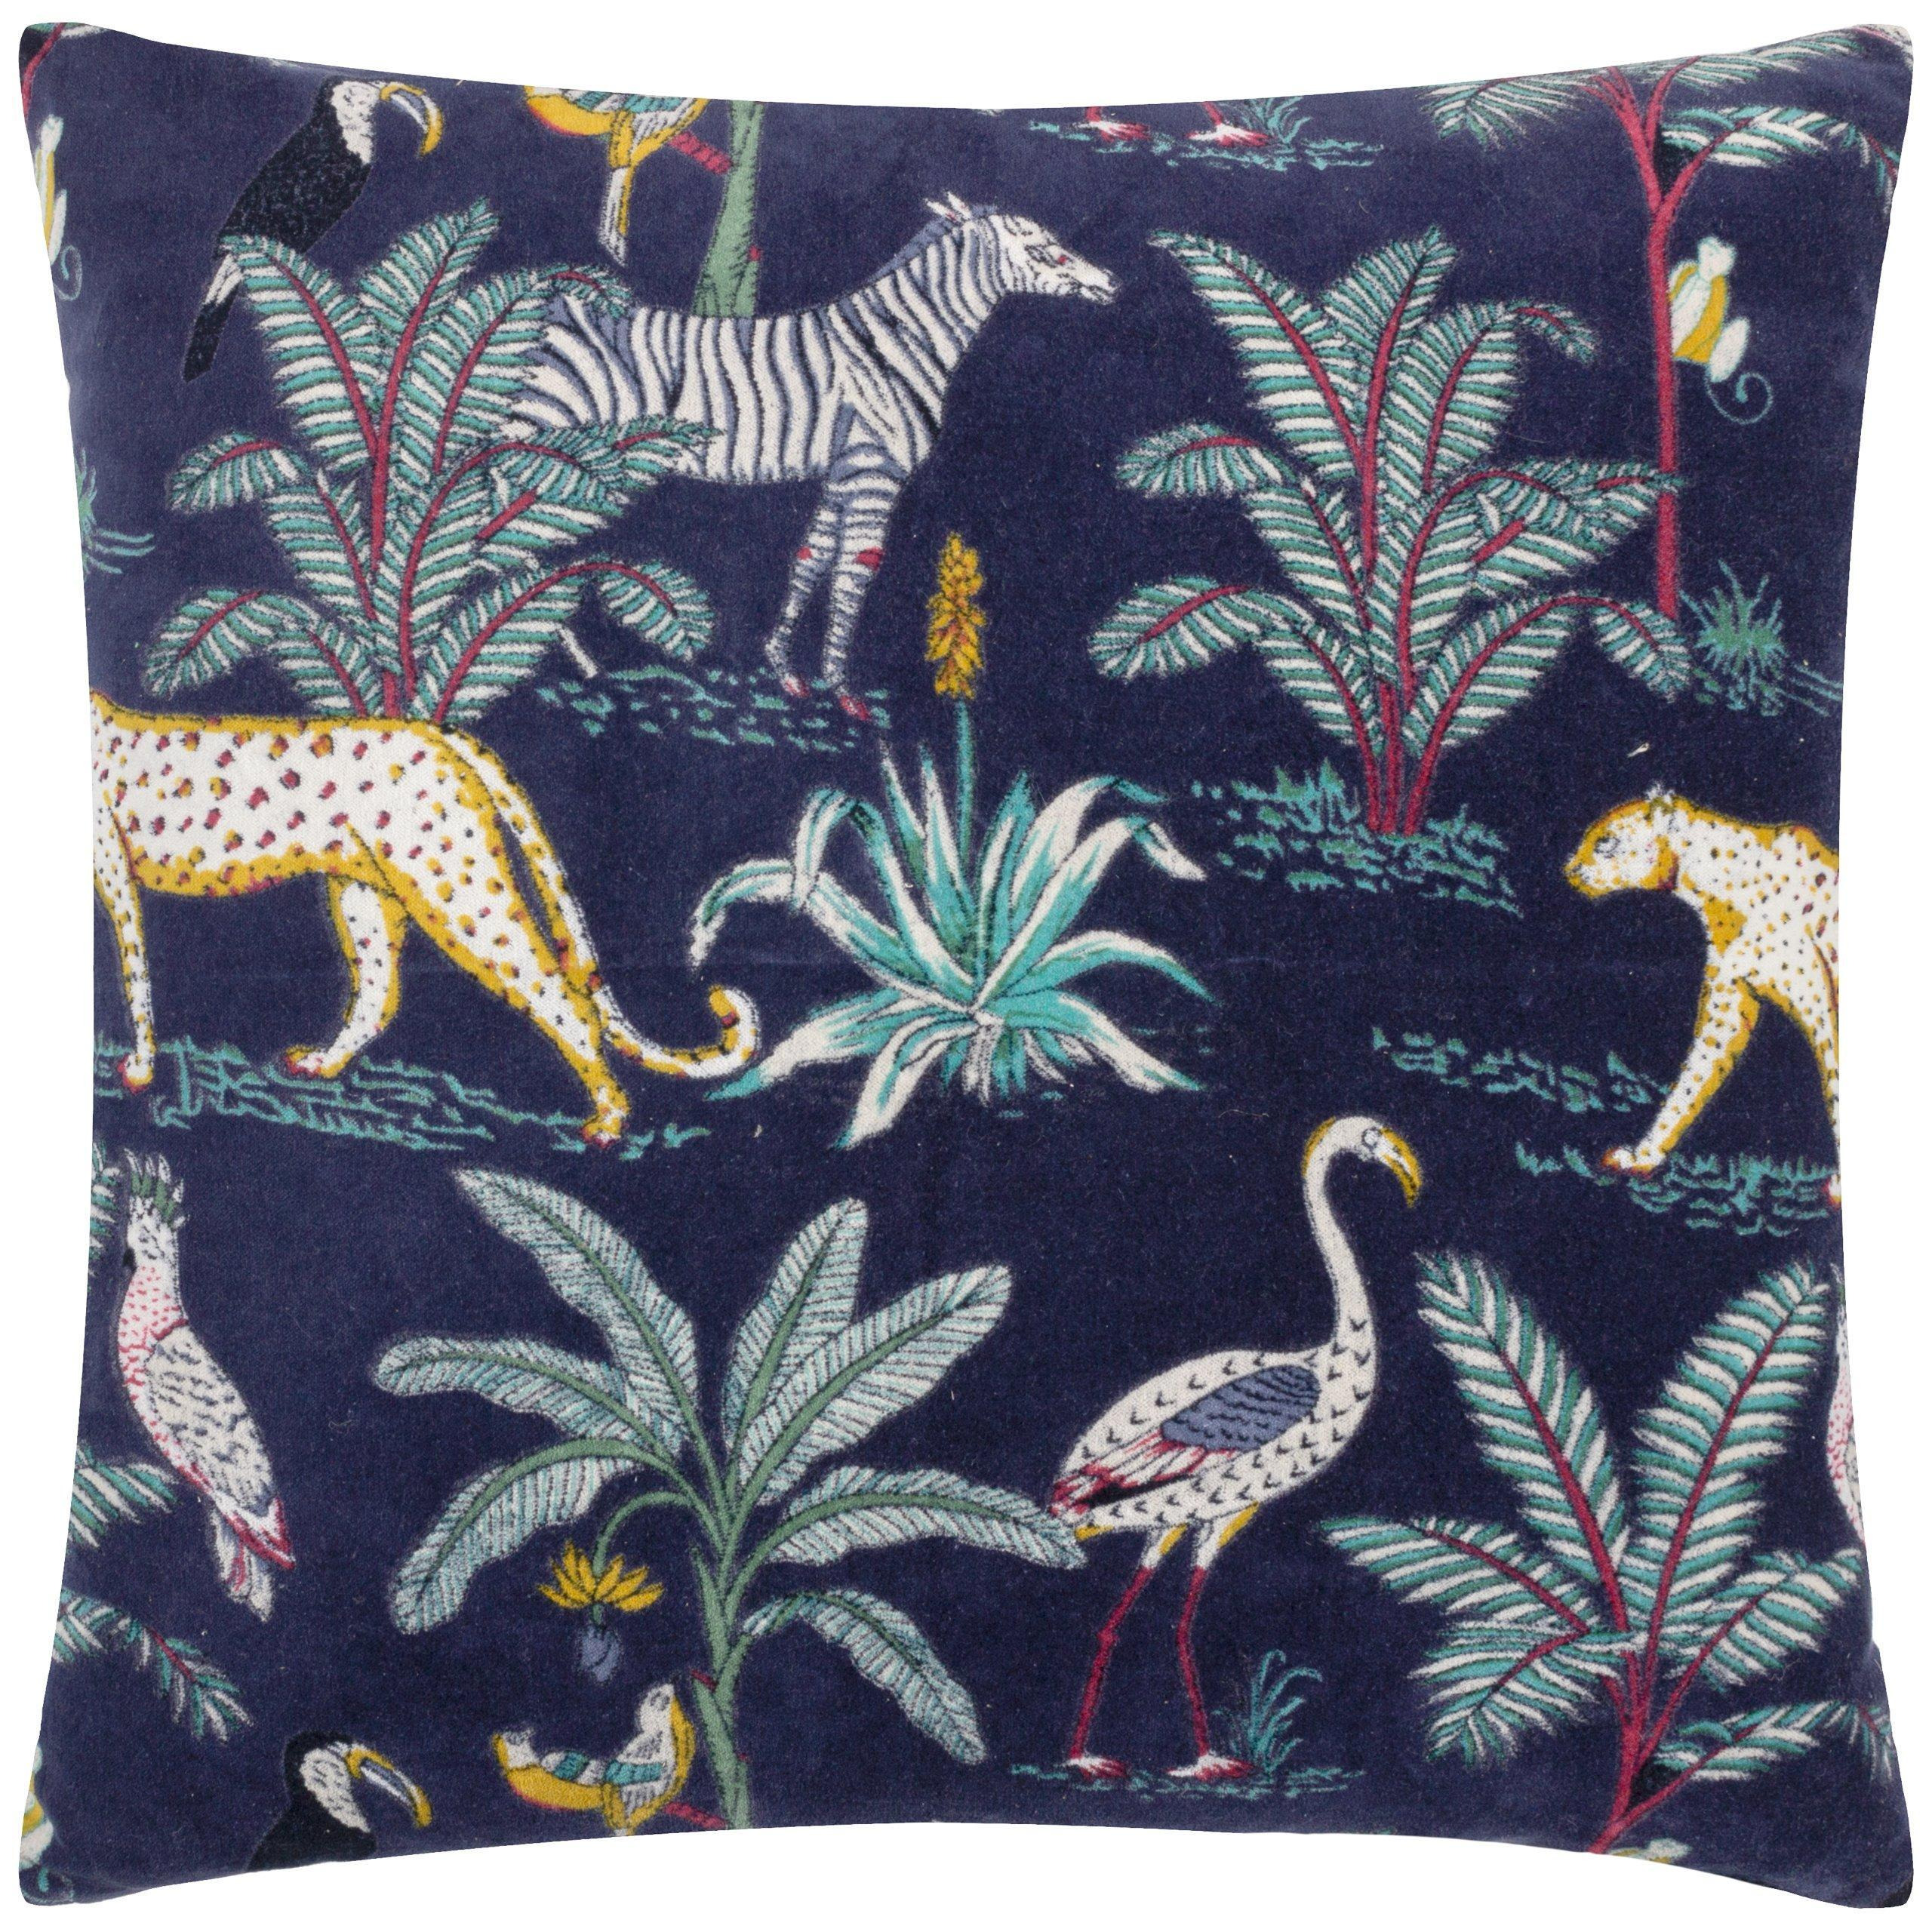 Wilds Tropical Cotton Cushion - image 1